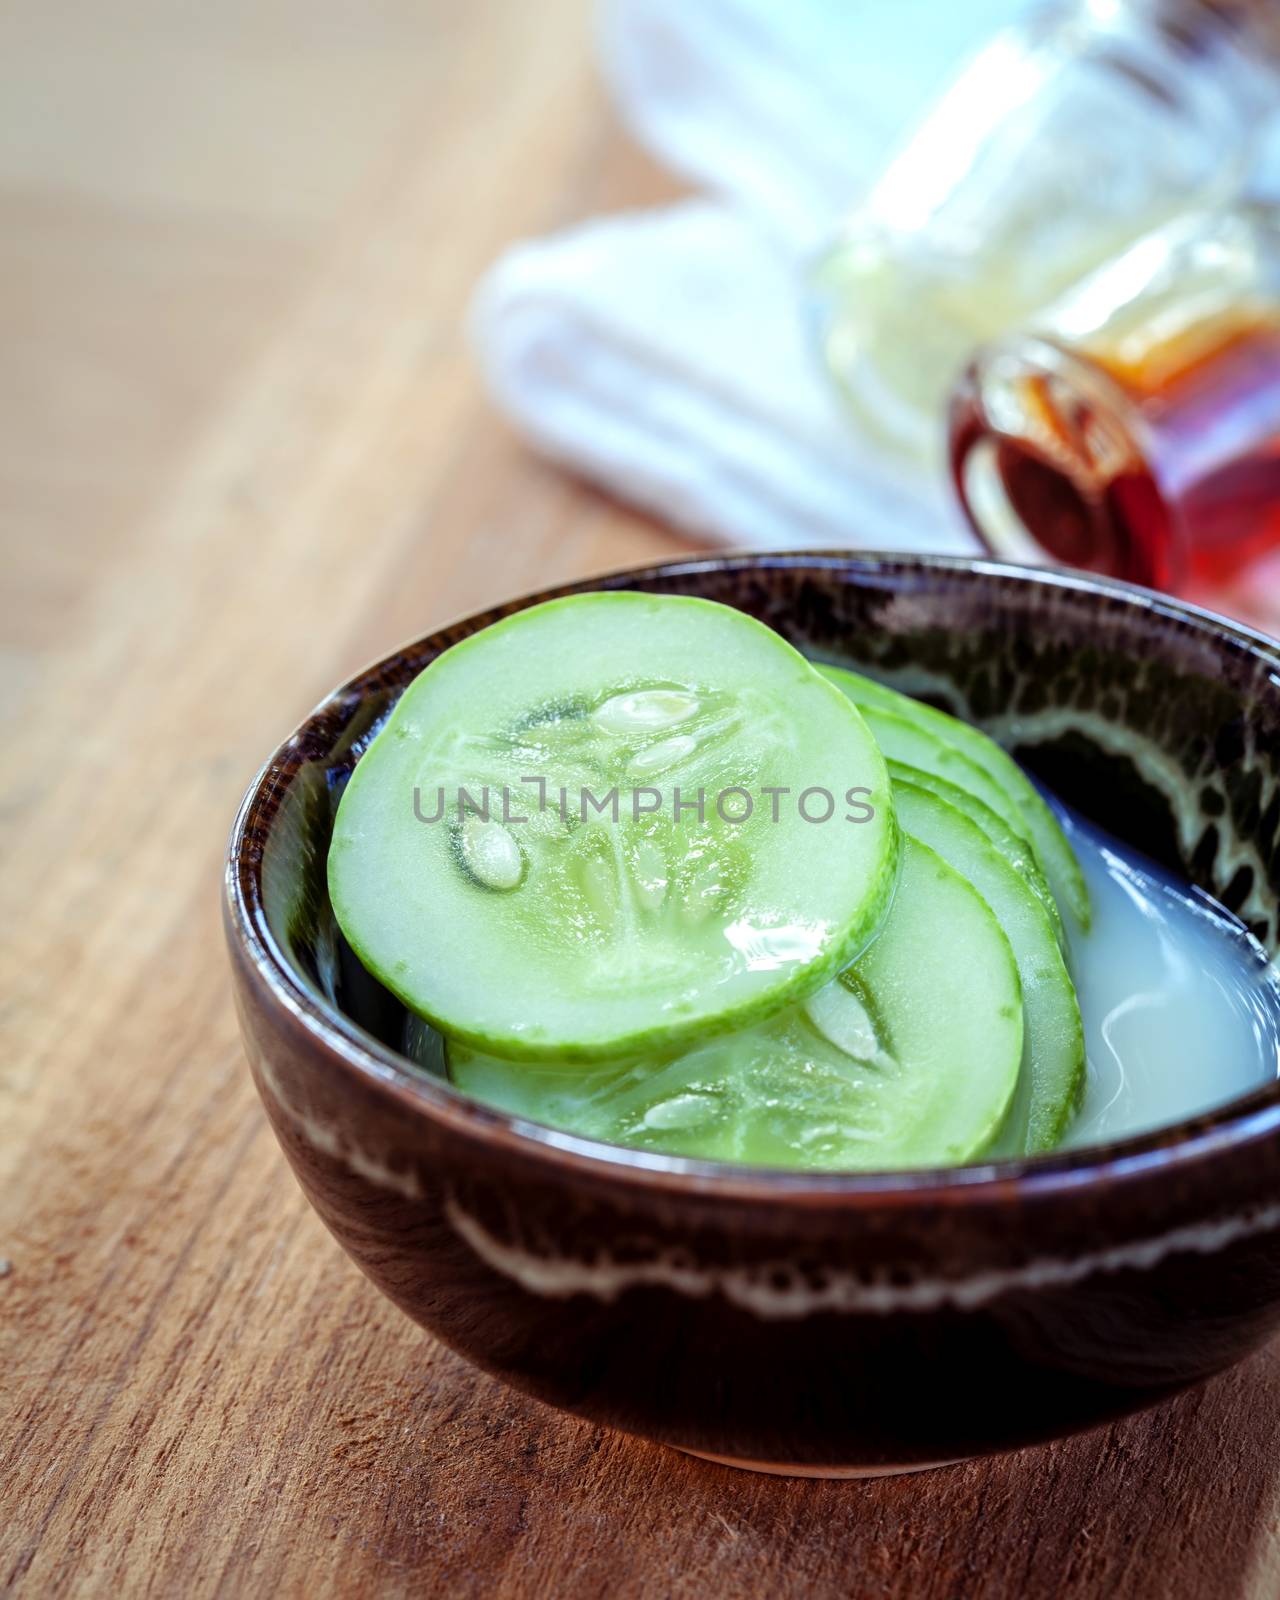 Homemade skin care and natural facial toner with natural ingredients cucumber and honey set up on wooden background. Selective focus shallow depth of field.